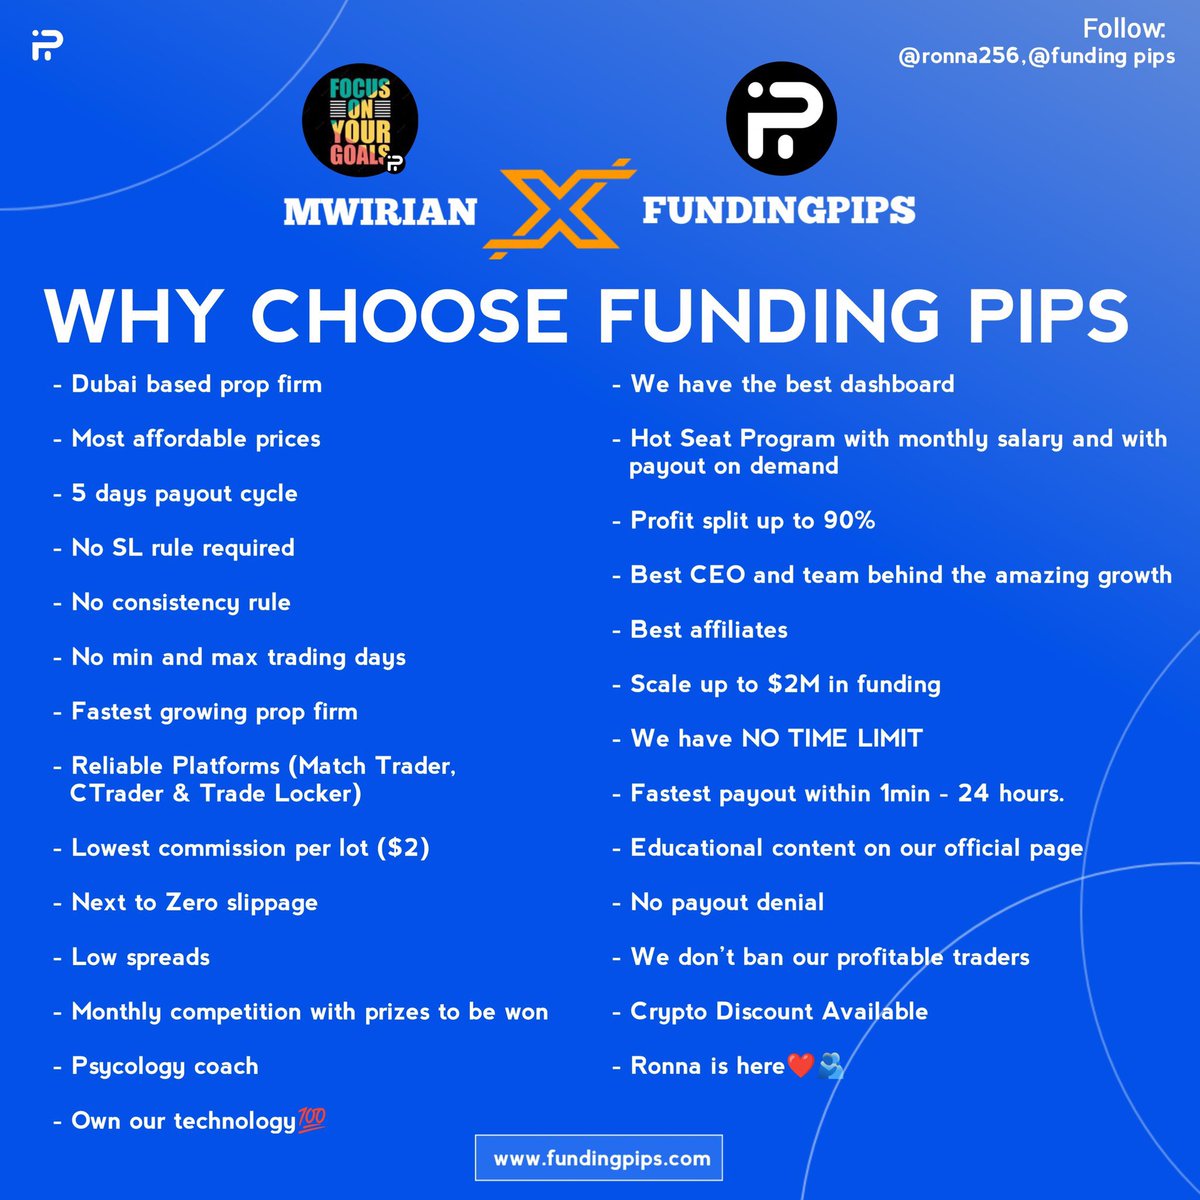 Good afternoon y’all❤️😊 I hope you kept safe. Tomorrow we start with energy. Here is why you should choose Funding Pips ahead of the new week🤍. Have a great day.